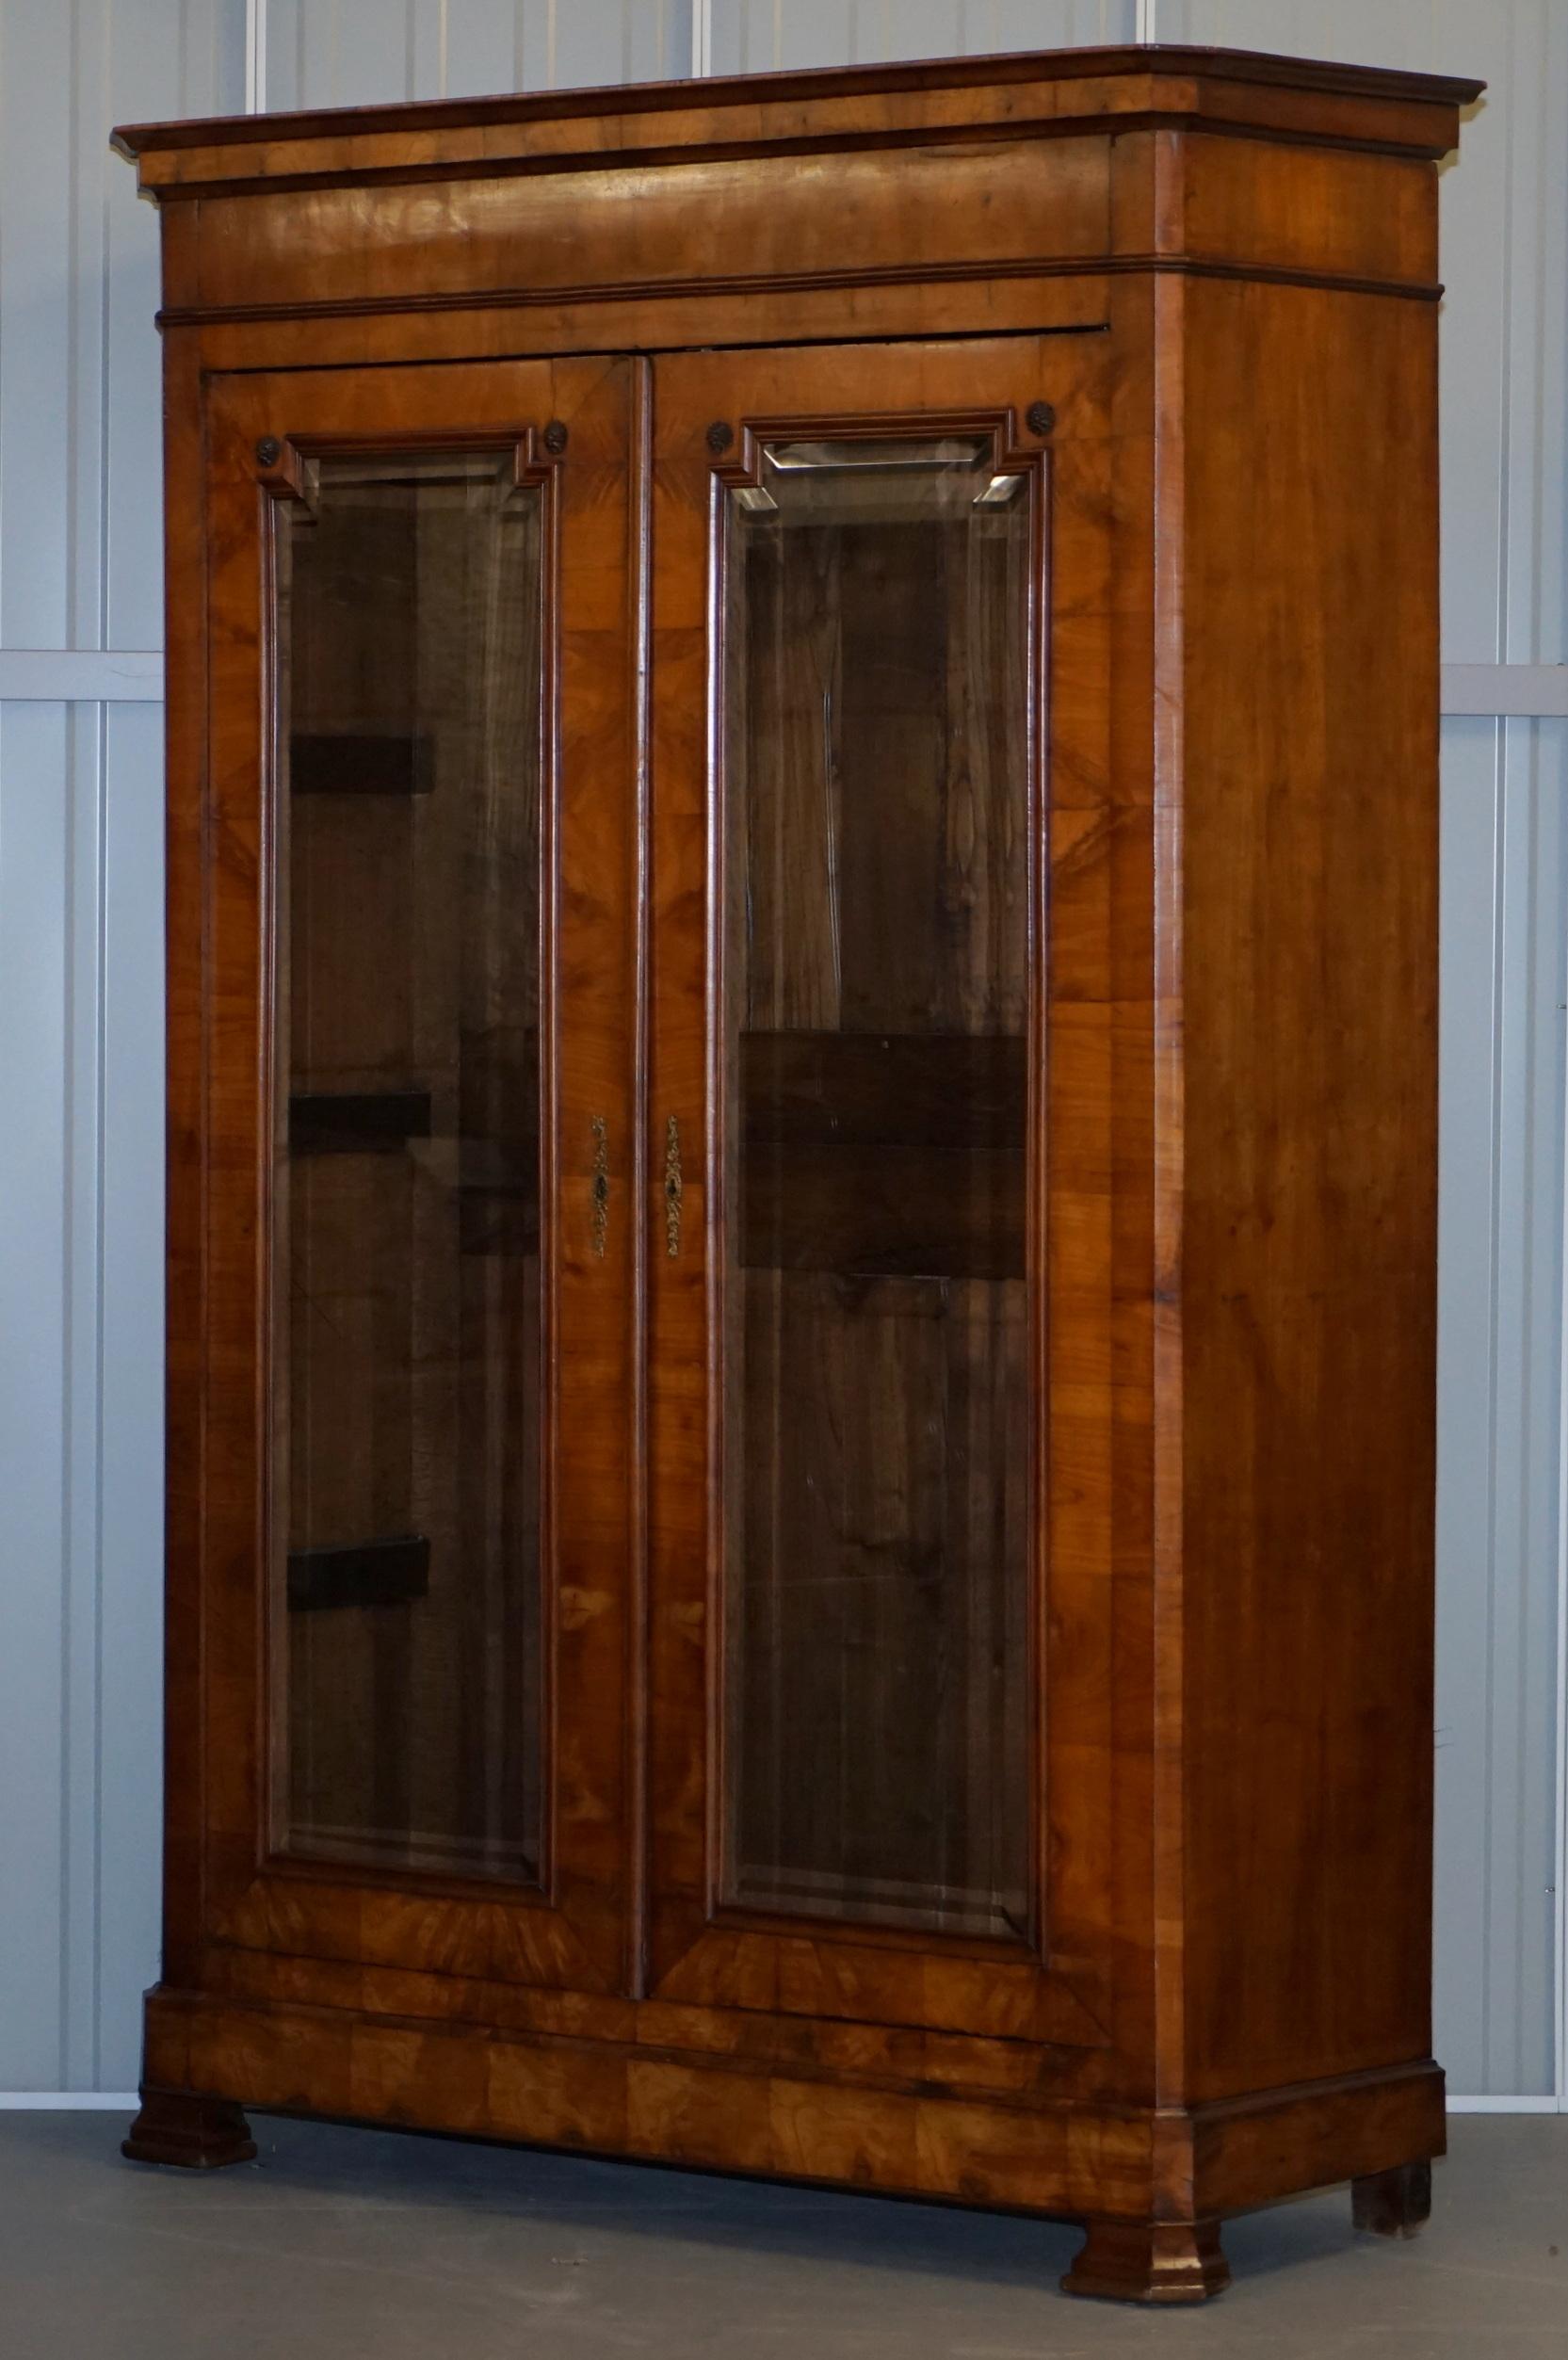 Wimbledon-Furniture

Wimbledon-Furniture is delighted to offer for sale this stunning original Swedish Biedermeier Cherrywood Armoire wardrobe with bevelled glazed doors

Please note the delivery fee listed is just a guide, it covers within the M25